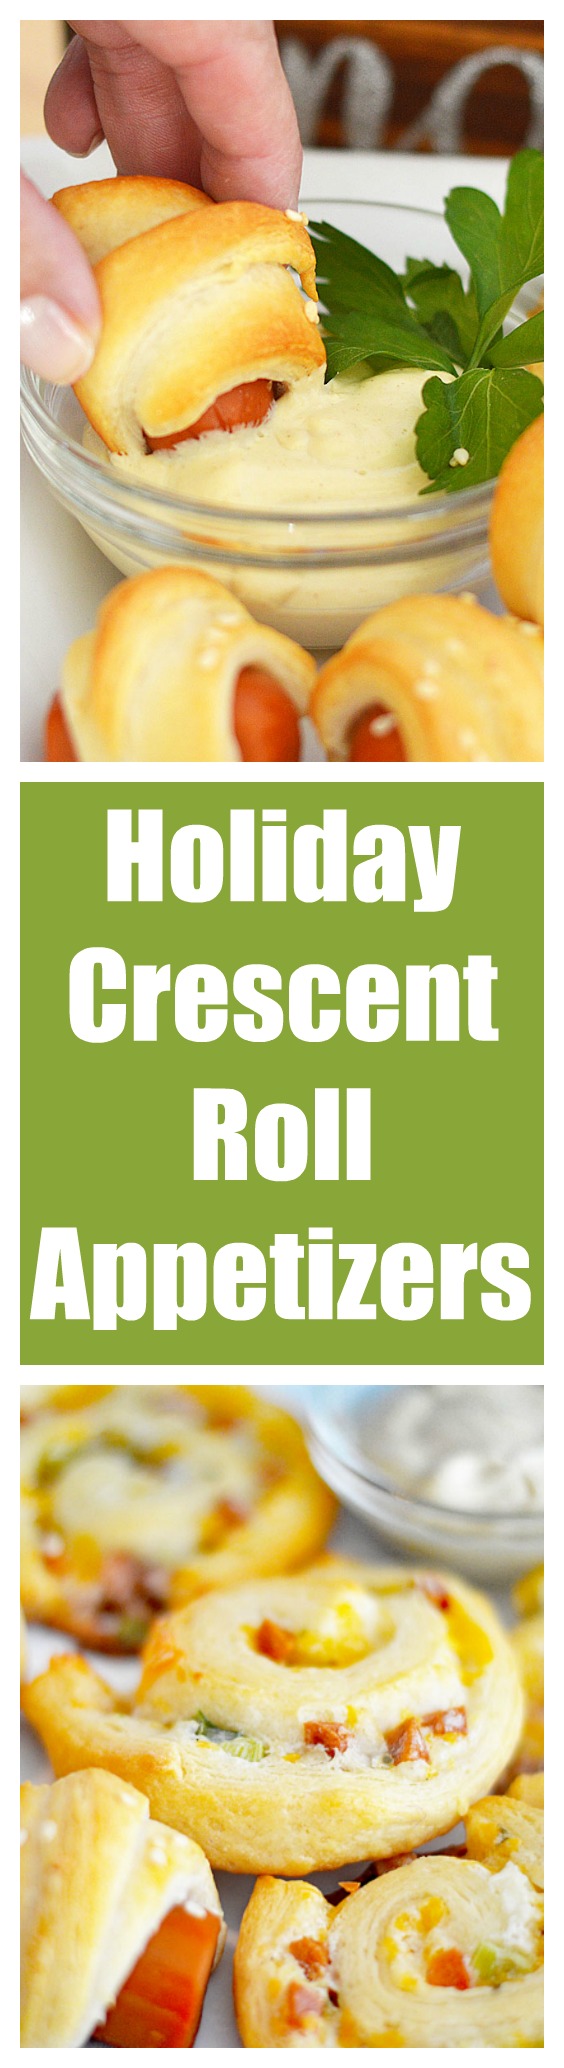 Immaculate Holiday Crescent Roll Appetizers